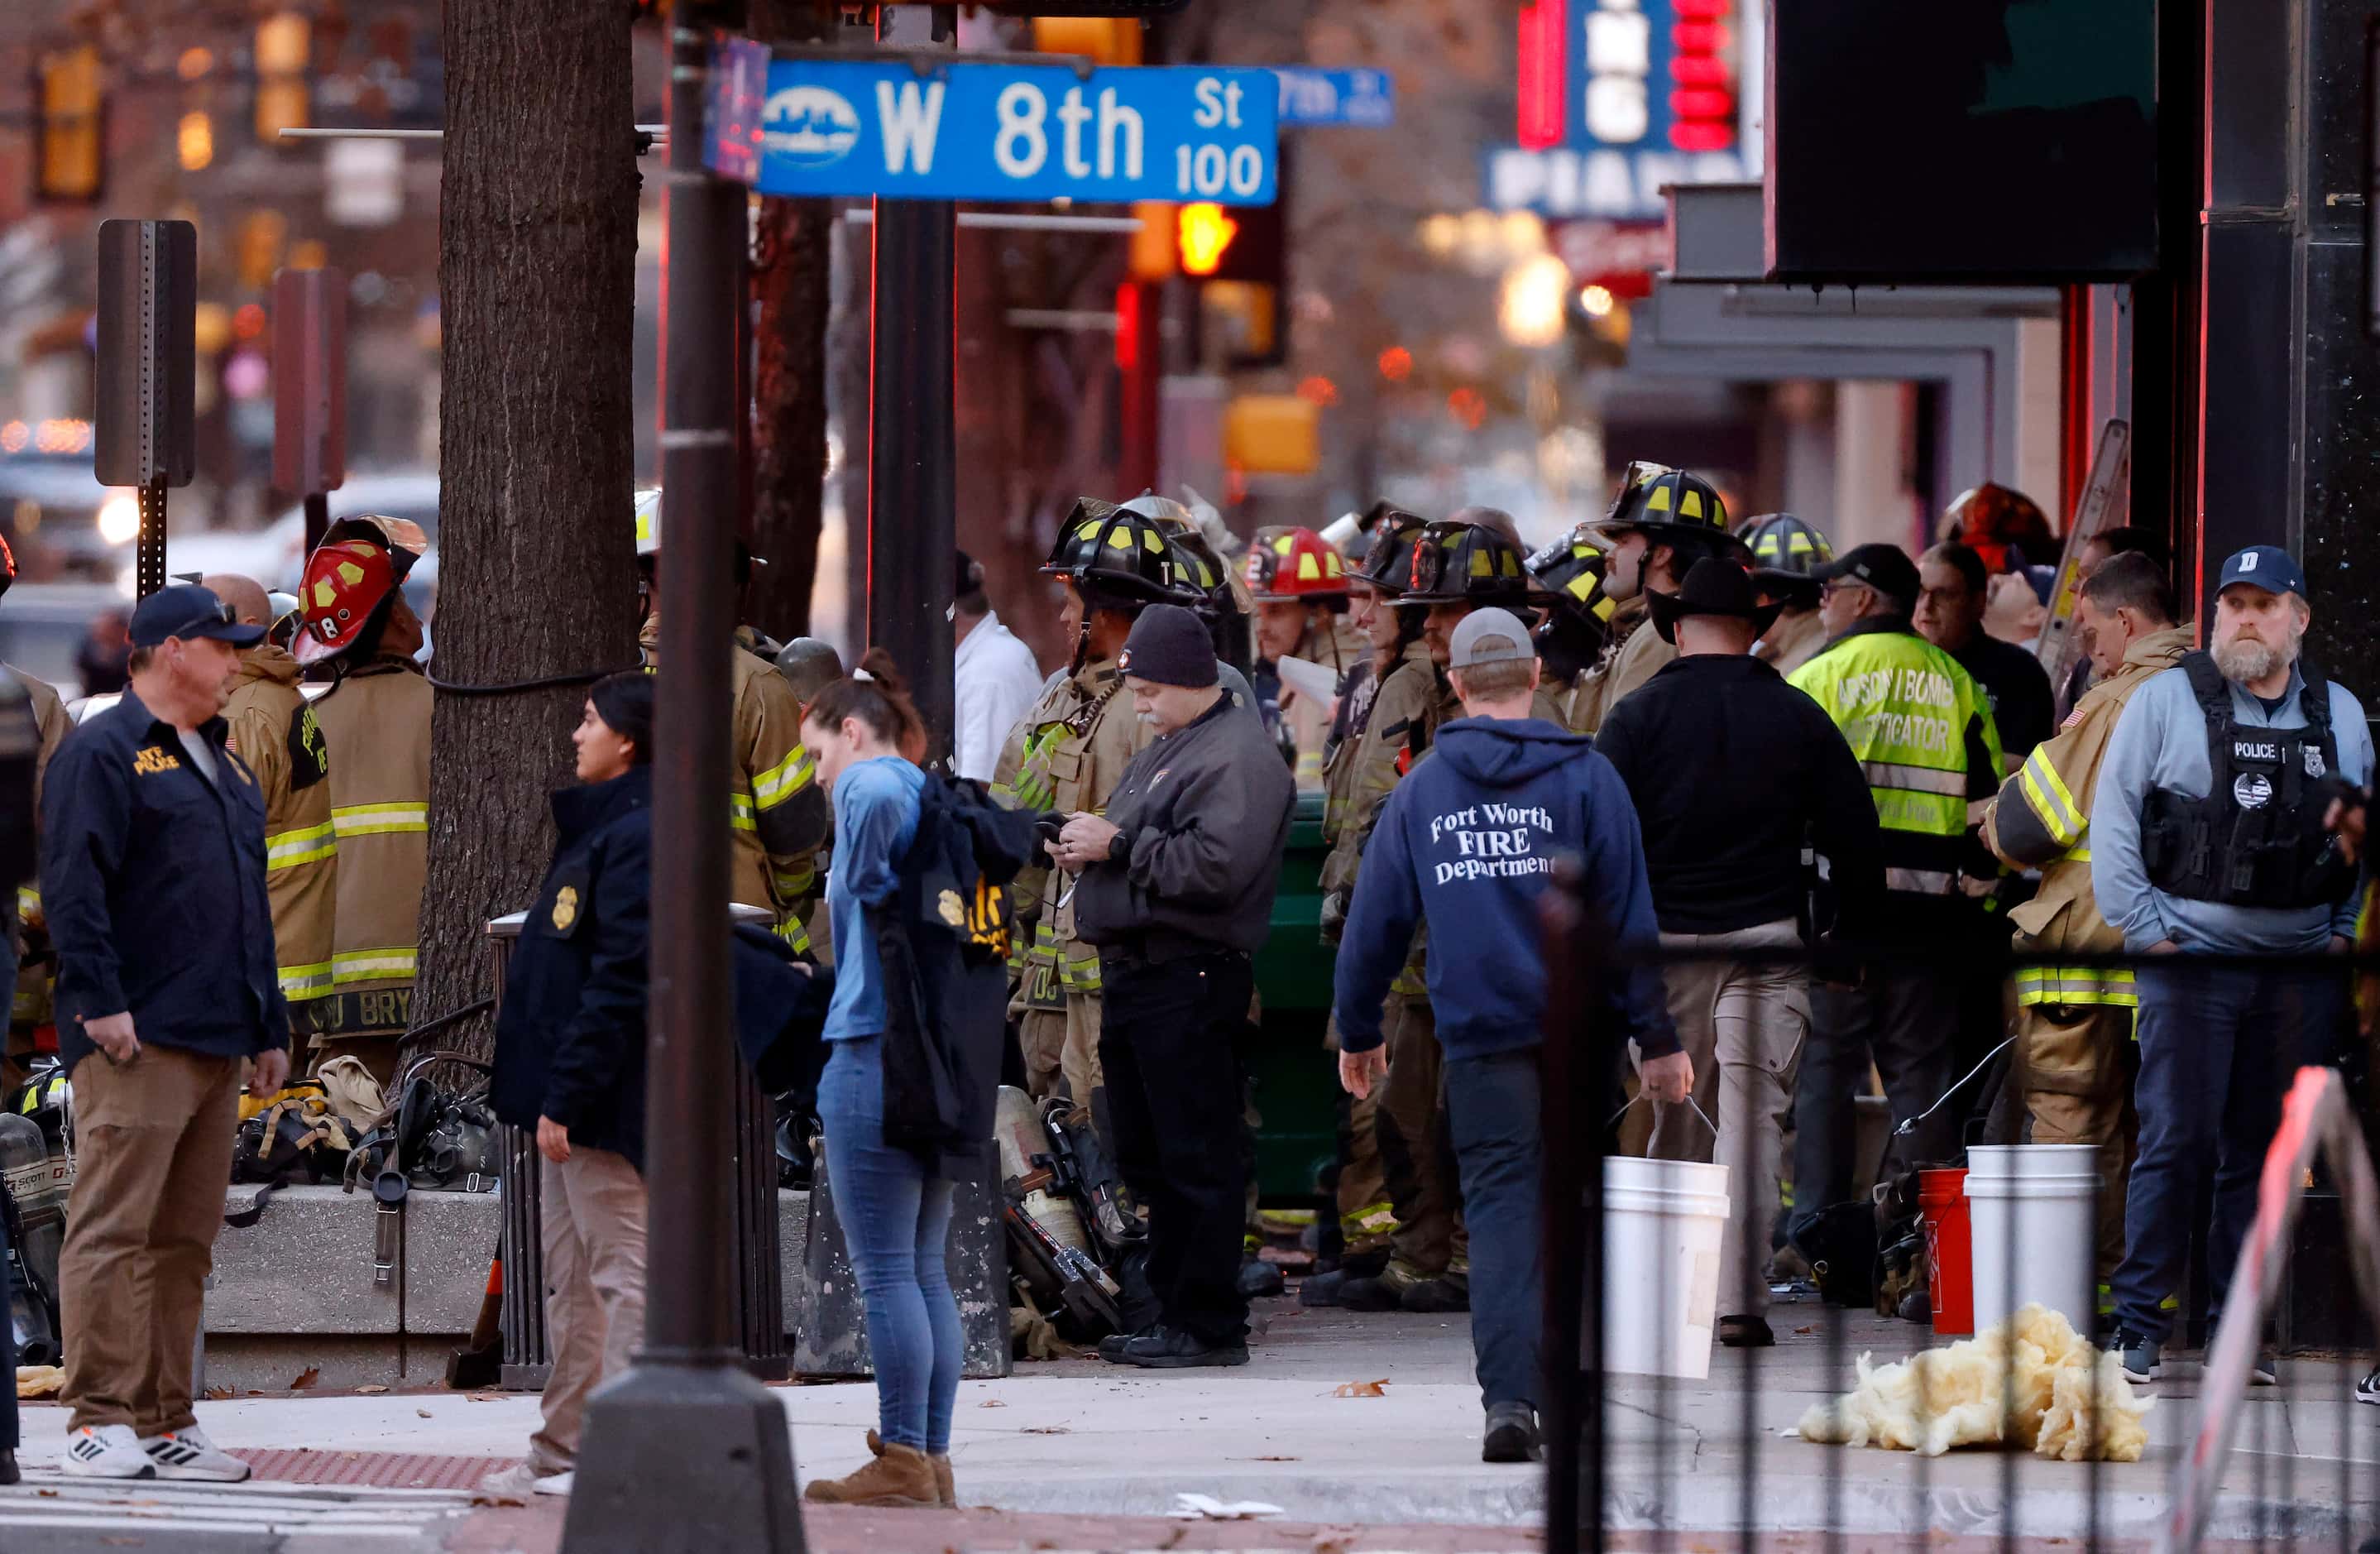 Officials gathered on Houston St. following an explosion that occurred at the Sandman...